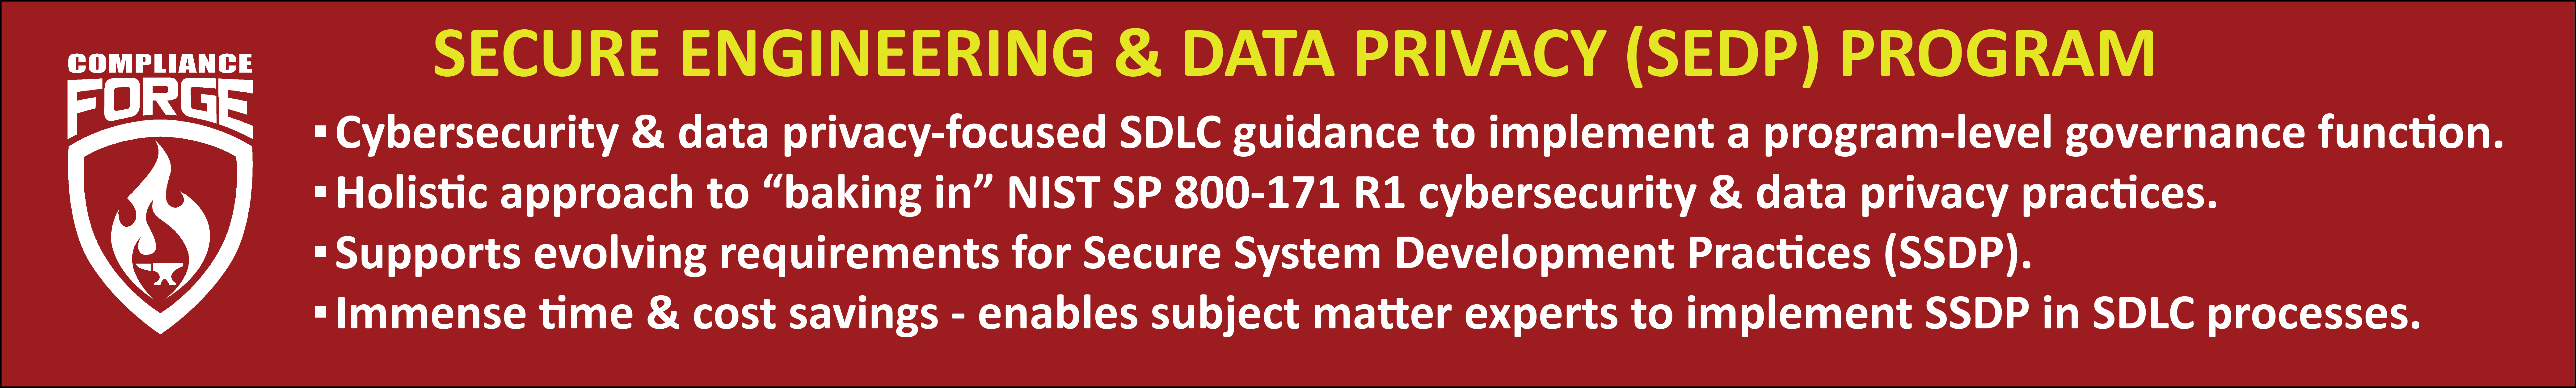 Security & Privacy By Design | NIST 800-160